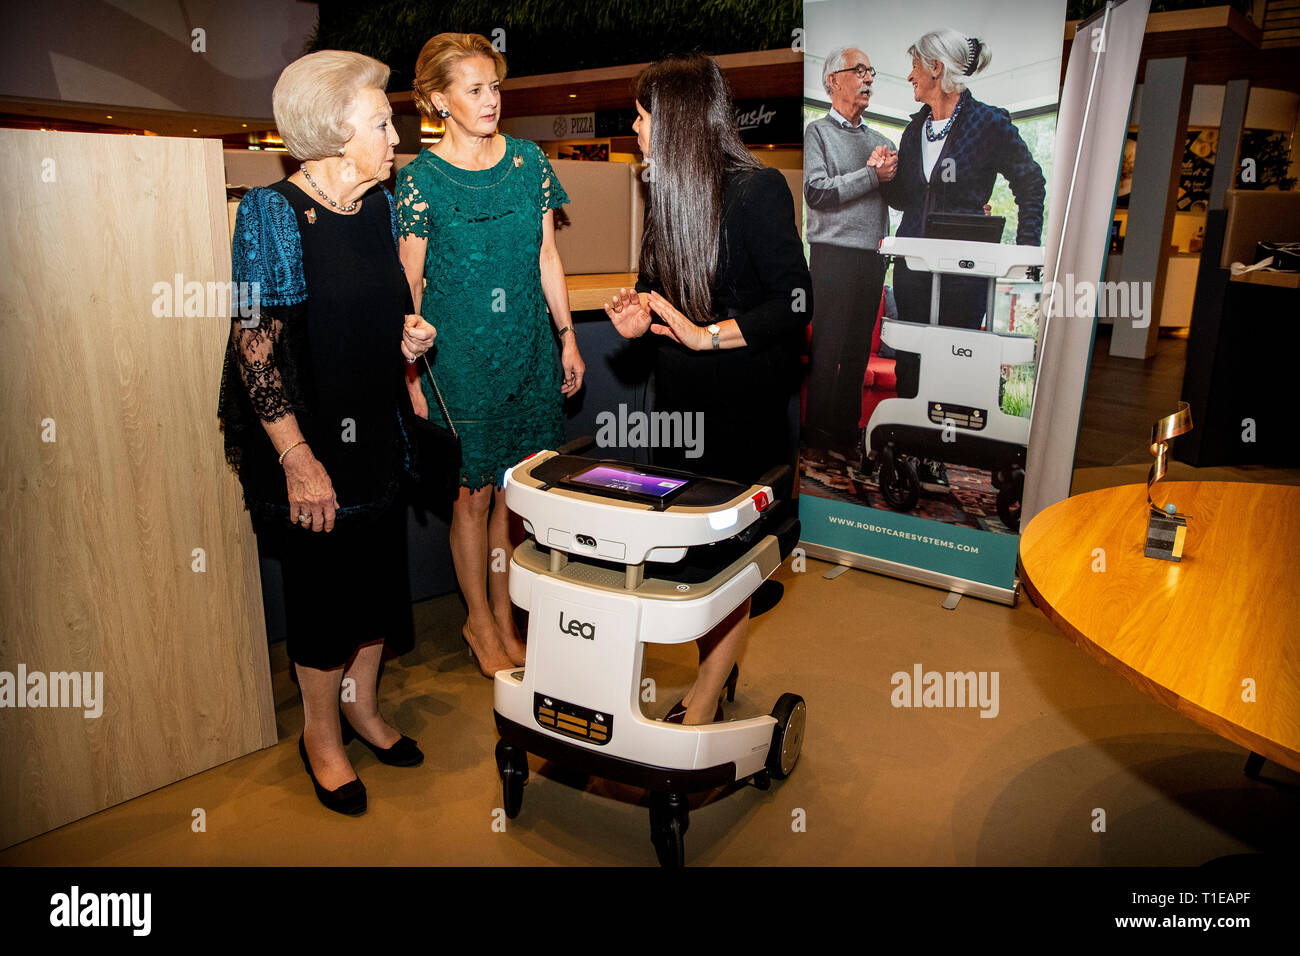 VELDHOVEN - In the presence of Princess Beatrix and Princess Mabel, the Prince Friso Engineer Prize is awarded to Maja Rudinac, founder of Robot Care systems. copyrught robin utrecht Stock Photo